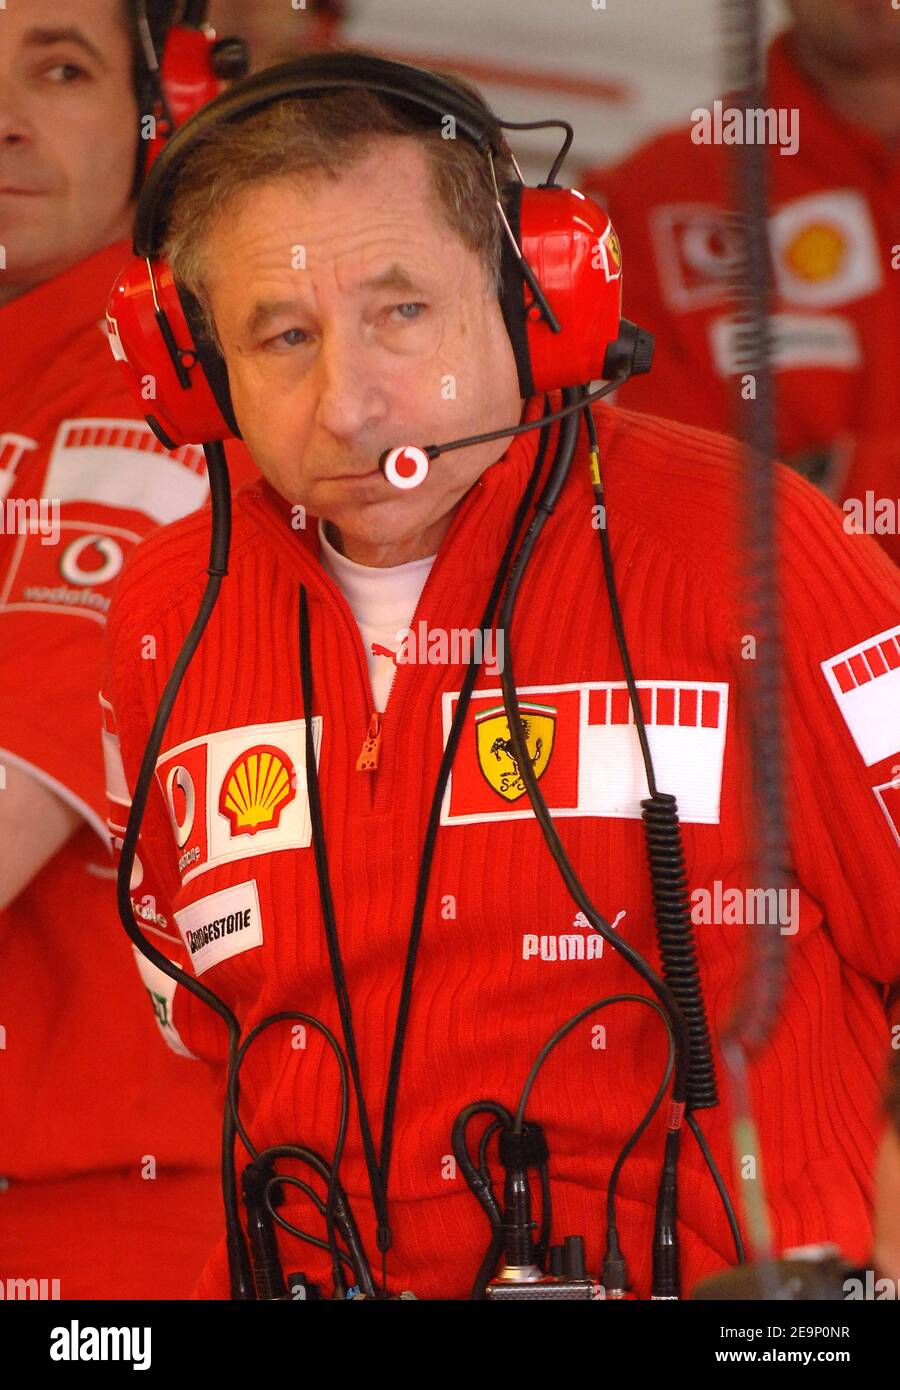 Ferrari F1 Team general manager Jean Todt in the paddock at the racetrack  in Interlagos near Sao Paulo Brazil on October 20, 2006. The F1 Grand Prix  of Brazil will take place